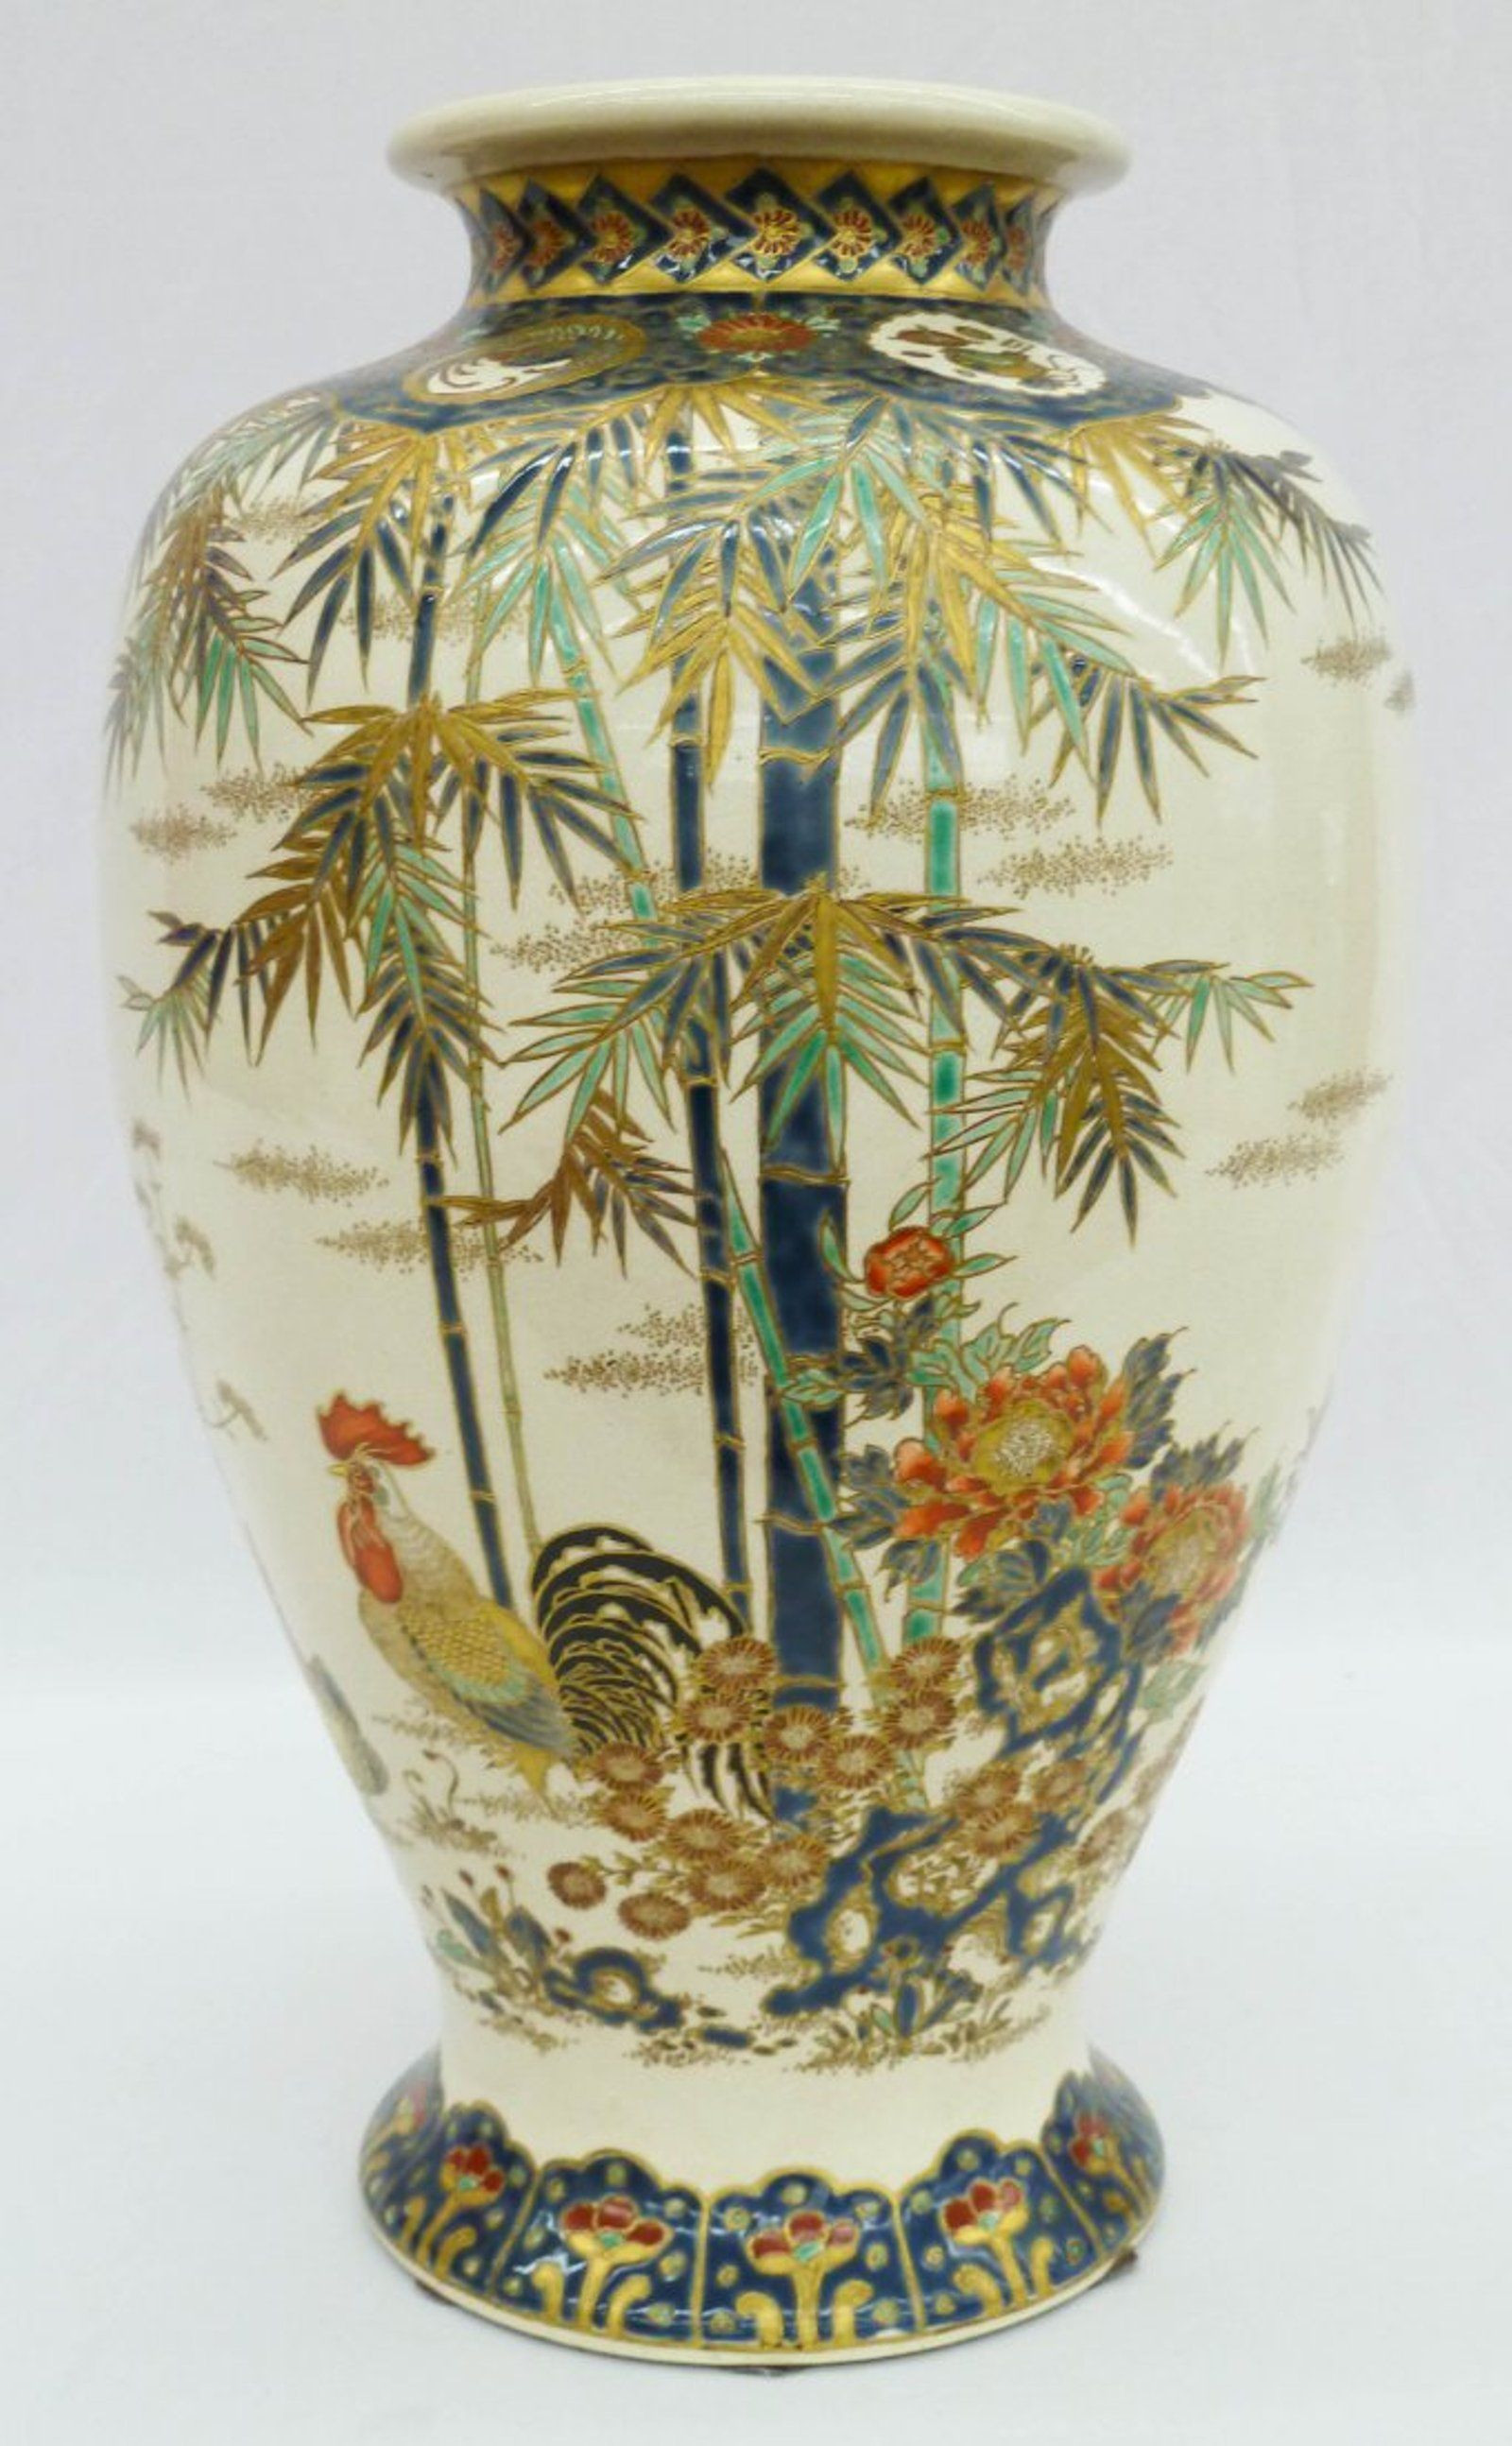 24 Cute Cloisonne Vase Value 2024 free download cloisonne vase value of 42 large japanese satsuma vase with roosters bamboo on japanese intended for 42 large japanese satsuma vase with roosters bamboo